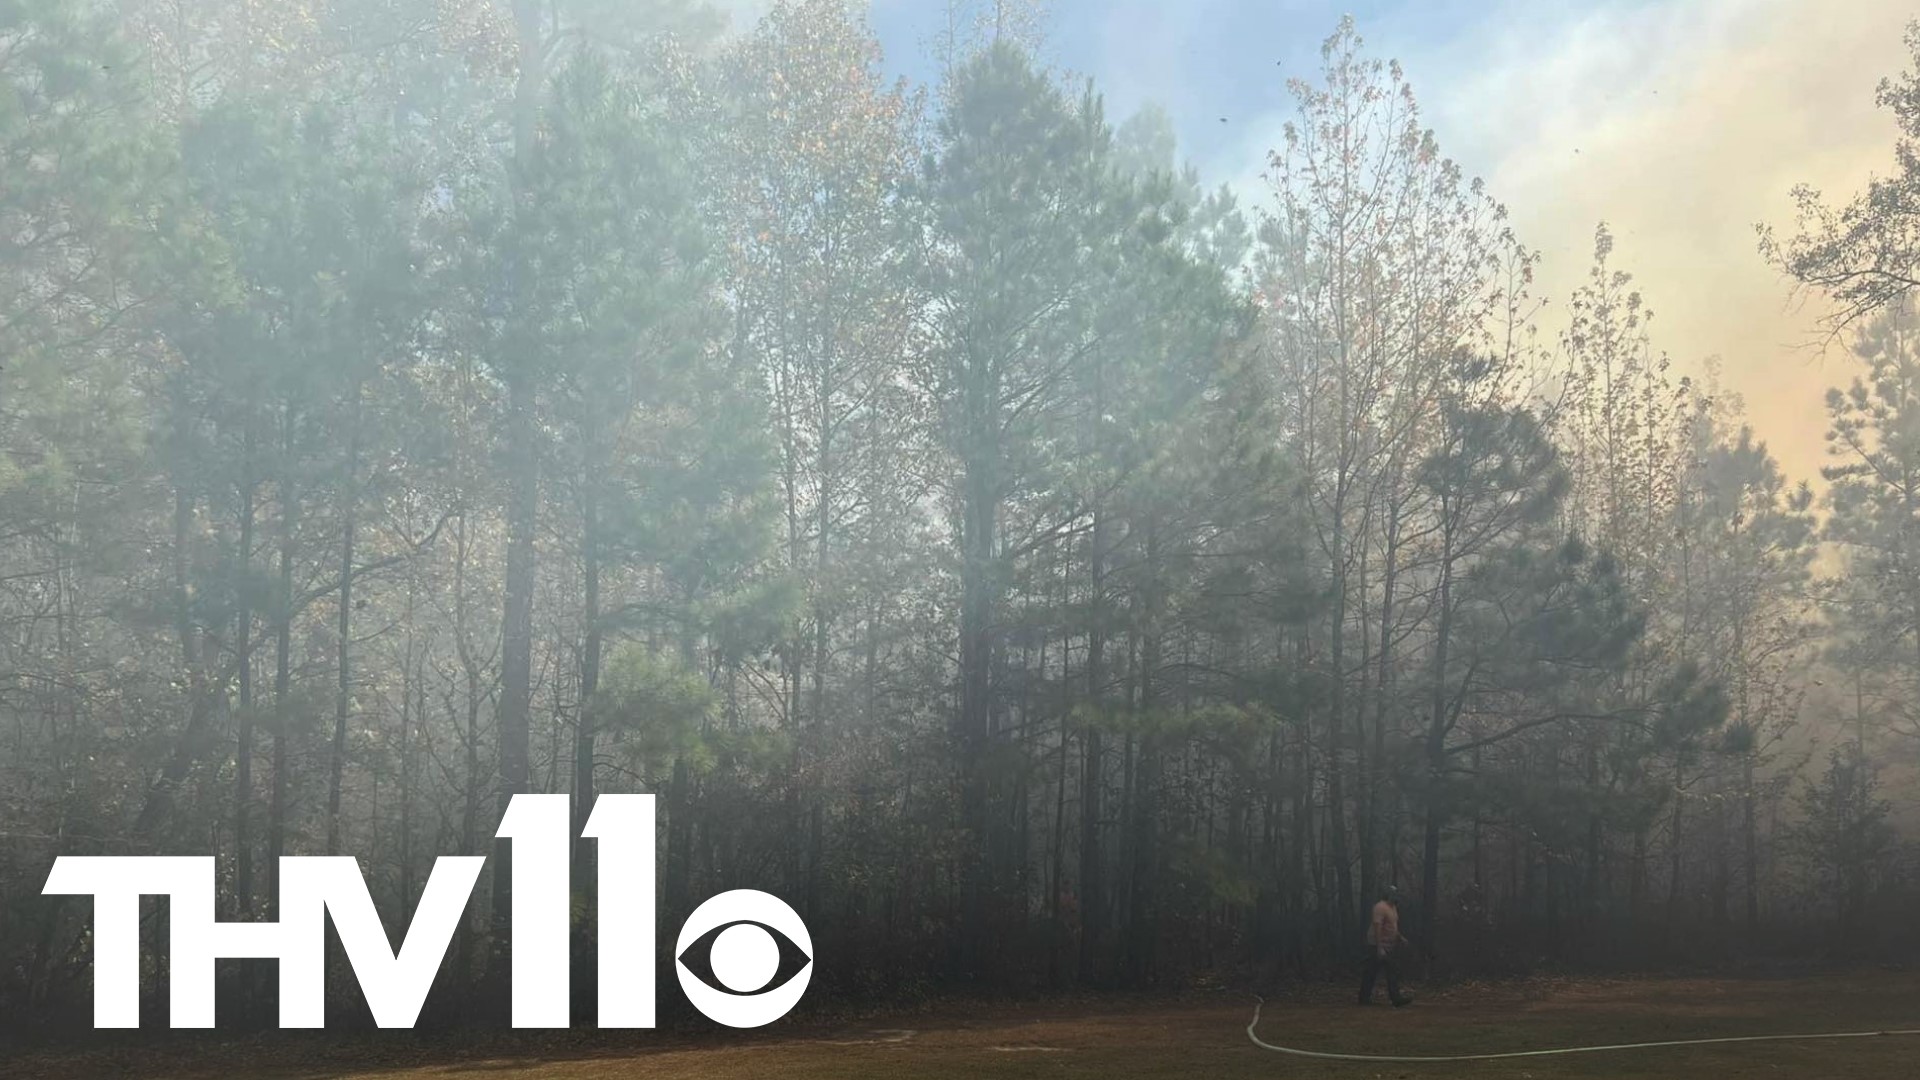 Jefferson County crews have reported yet another wildfire near Highway 79 and Rayhan Road in Pine Bluff.